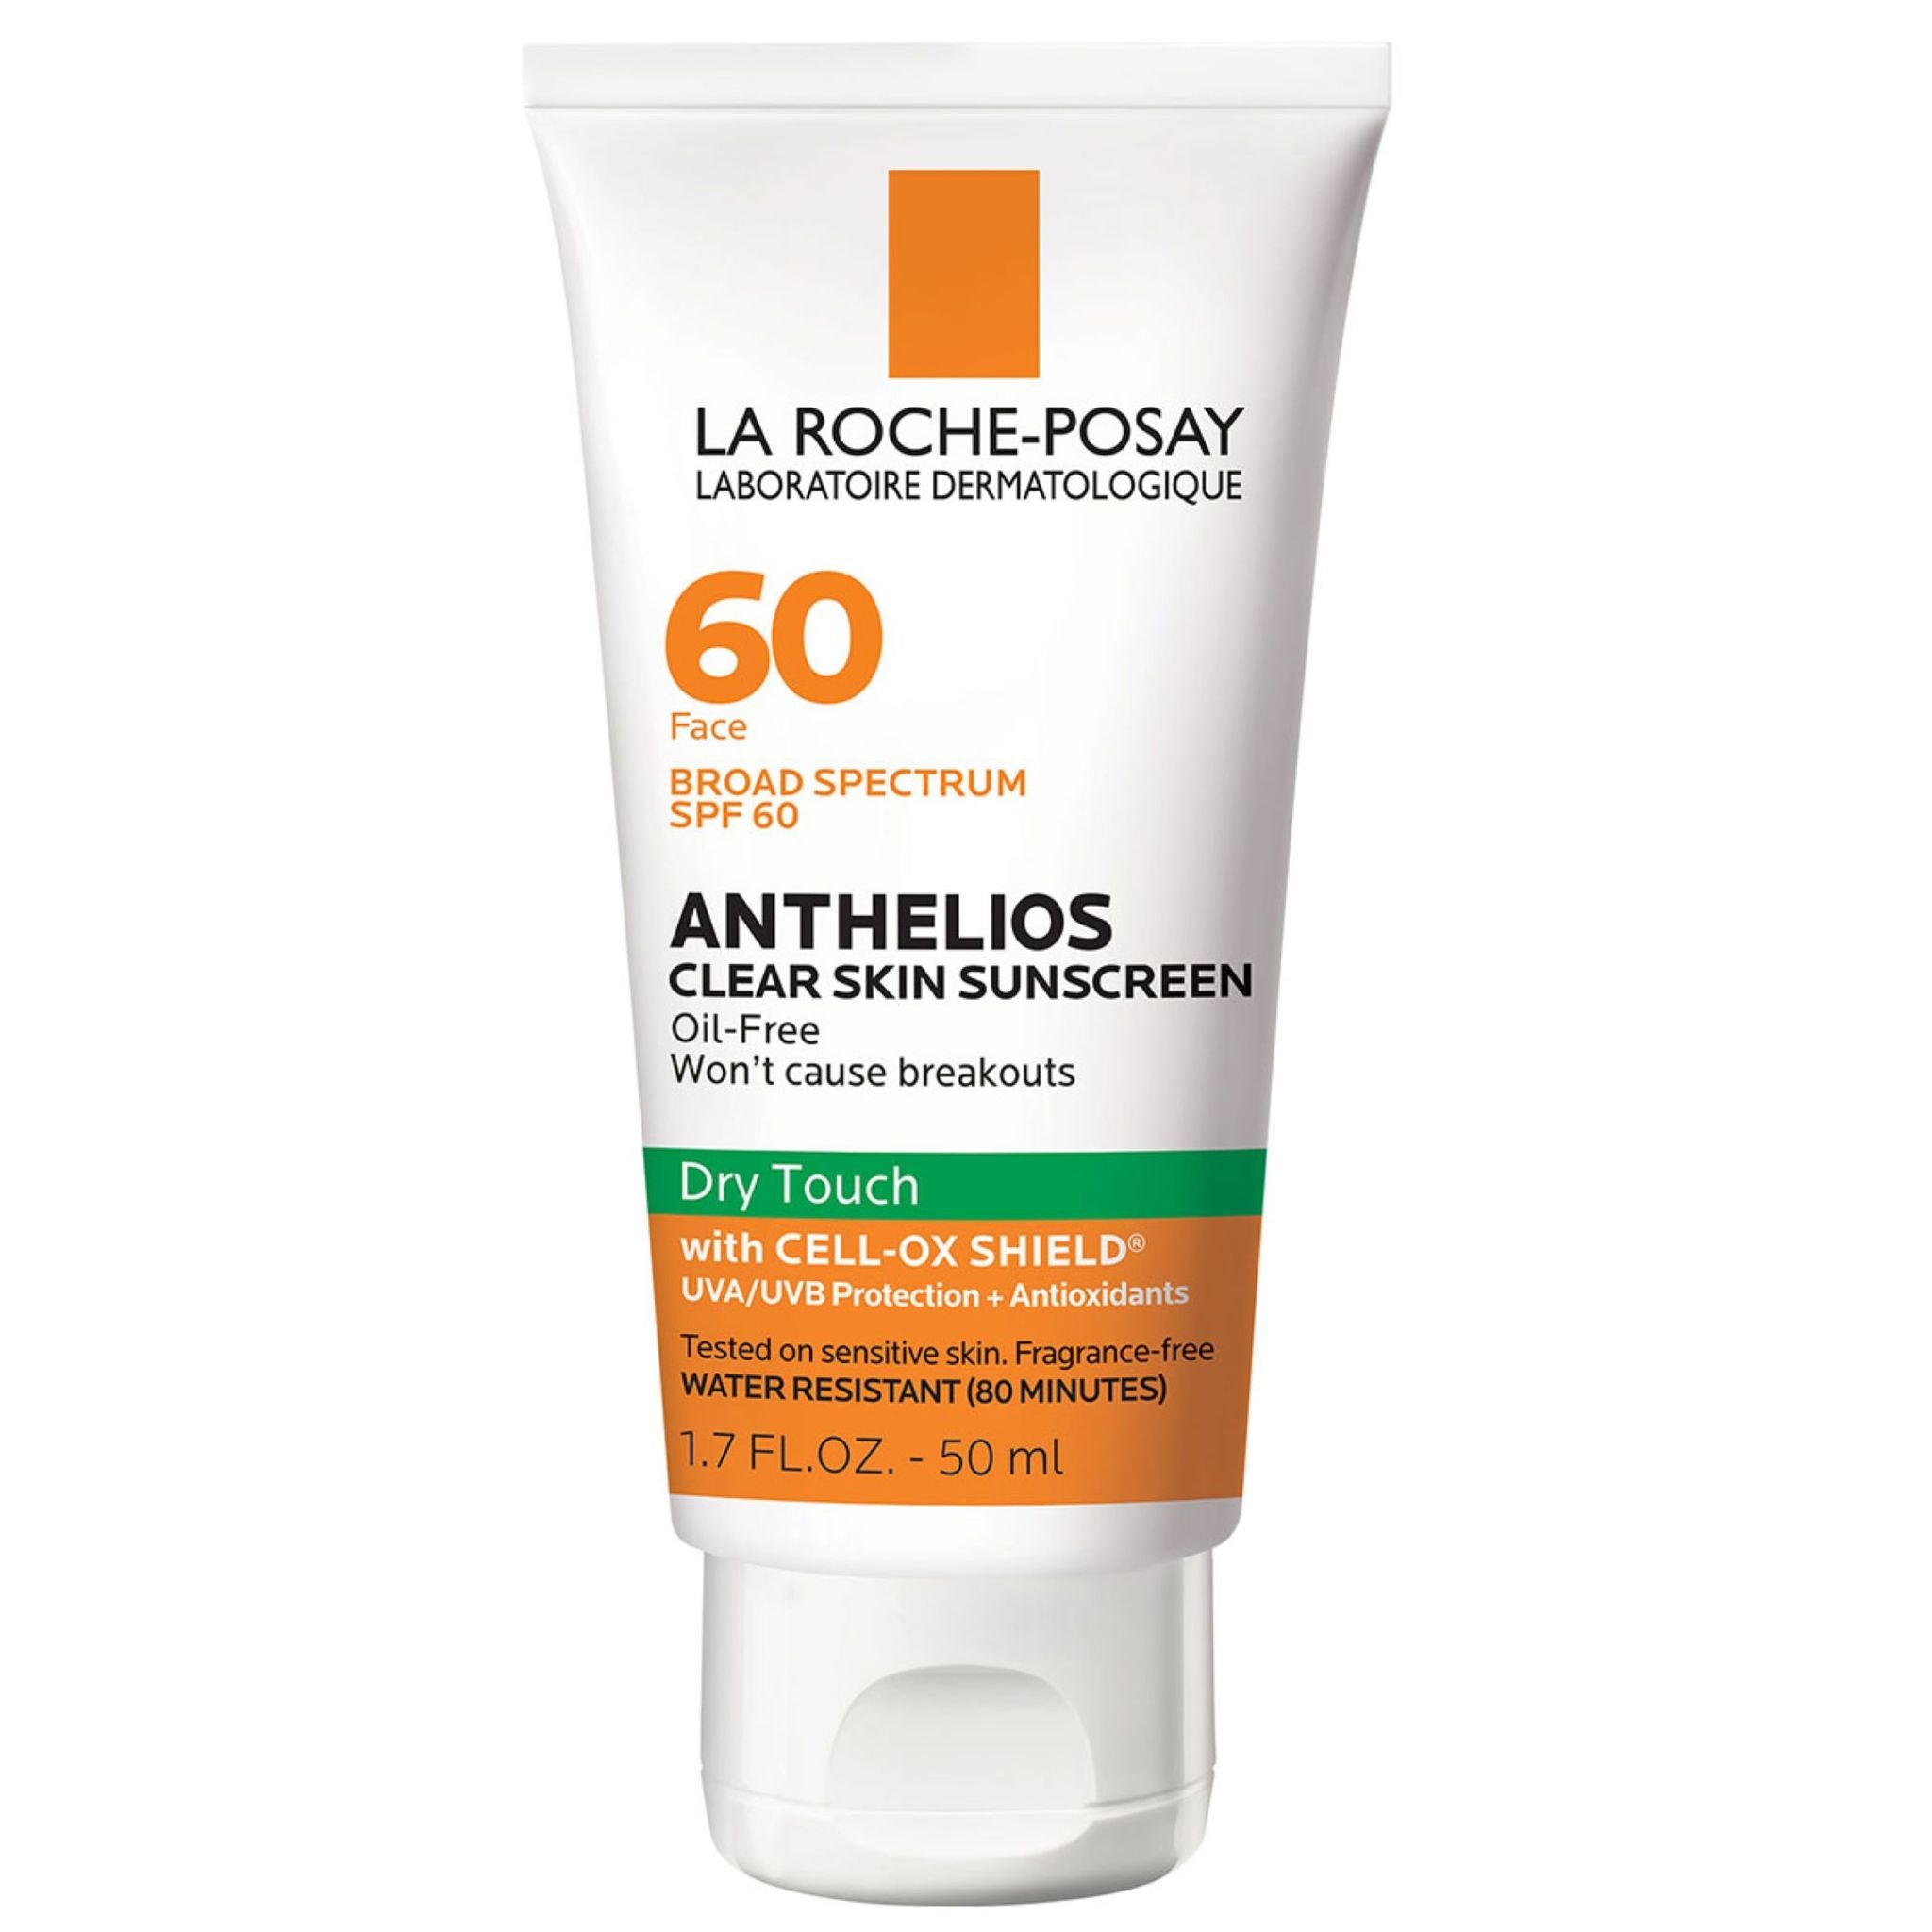 La Roche-Posay Anthelios Clear Skin Dry Touch Sunscreen SPF 60 main image.